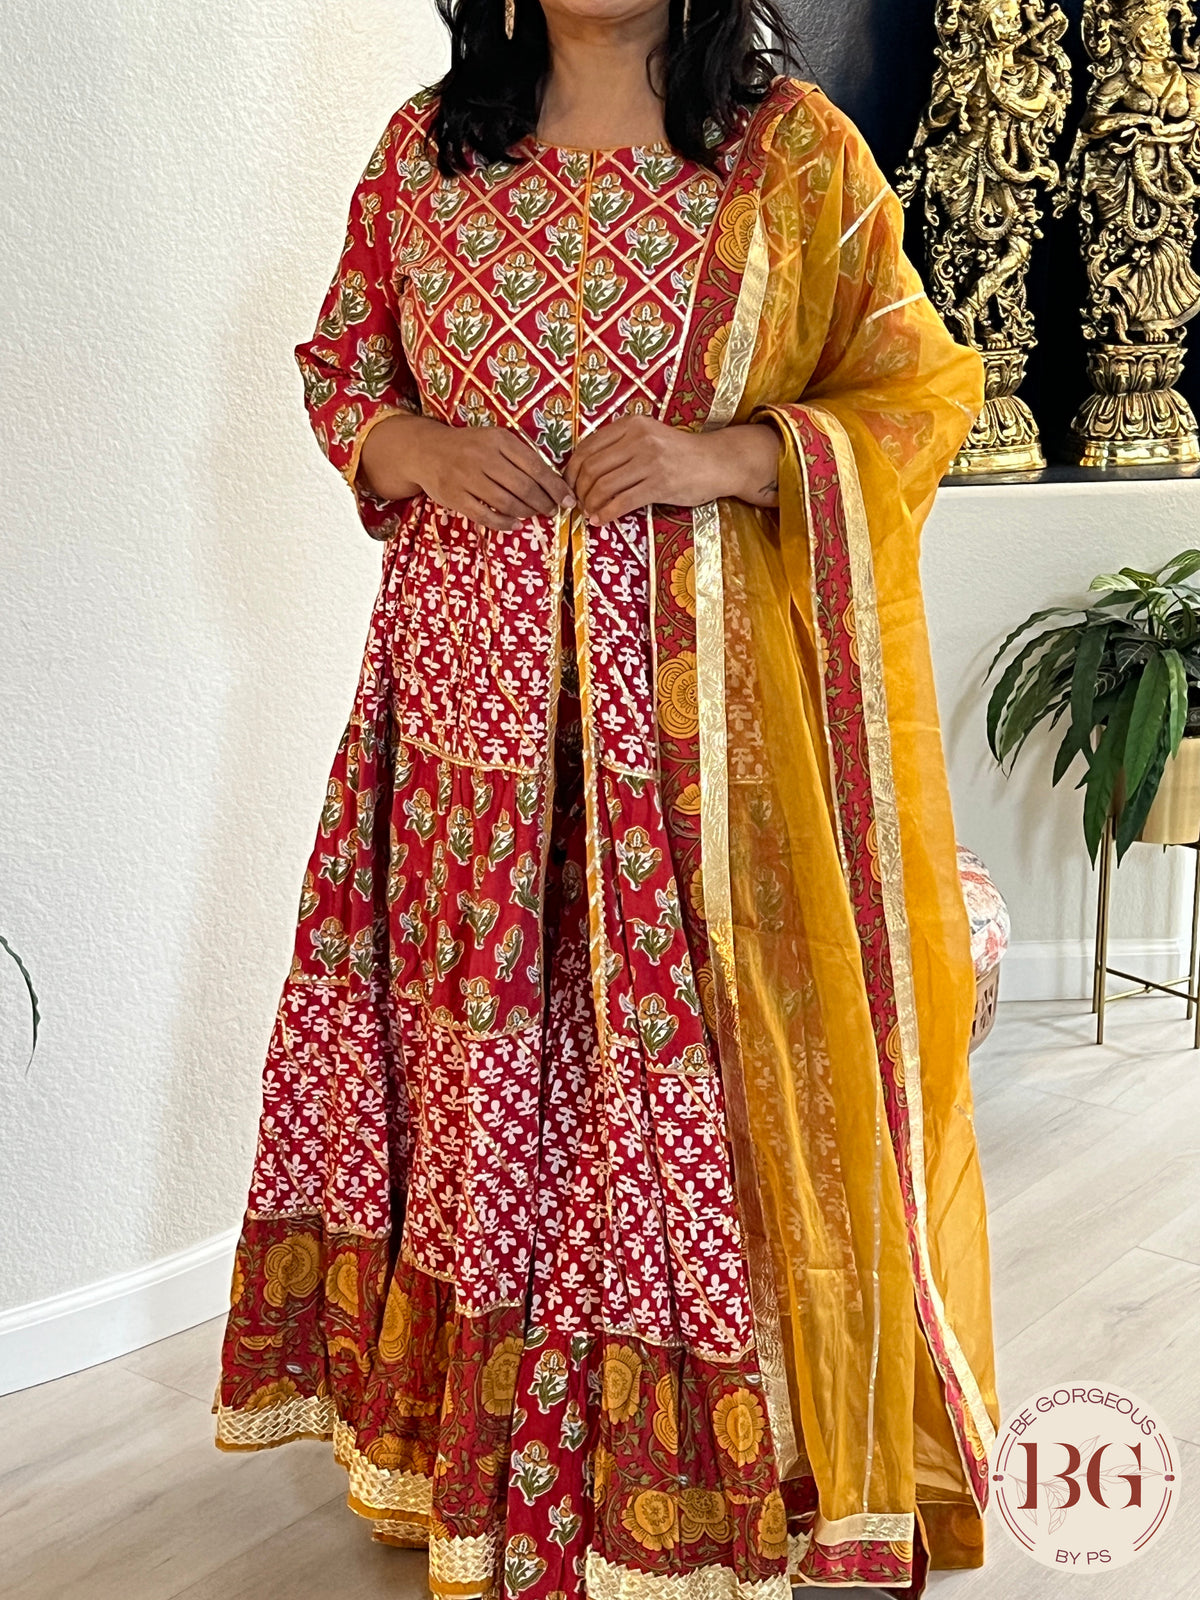 Garara set with organza dupatta in gorgeous red and and yellow combination.